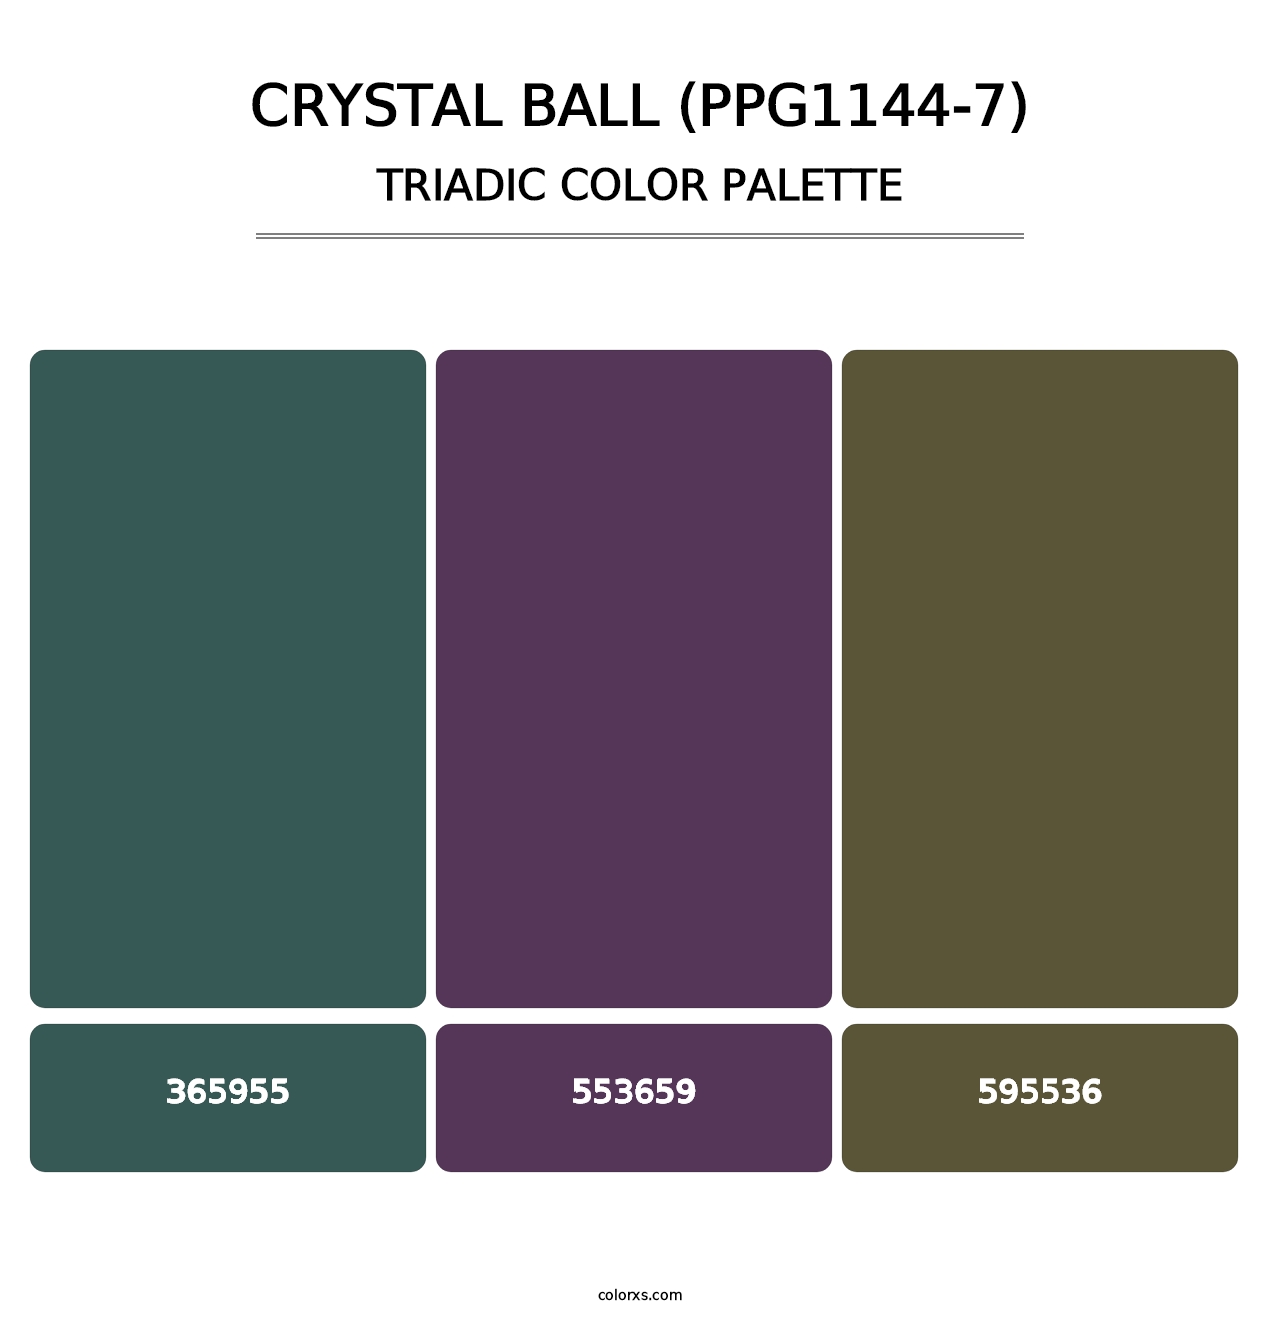 Crystal Ball (PPG1144-7) - Triadic Color Palette